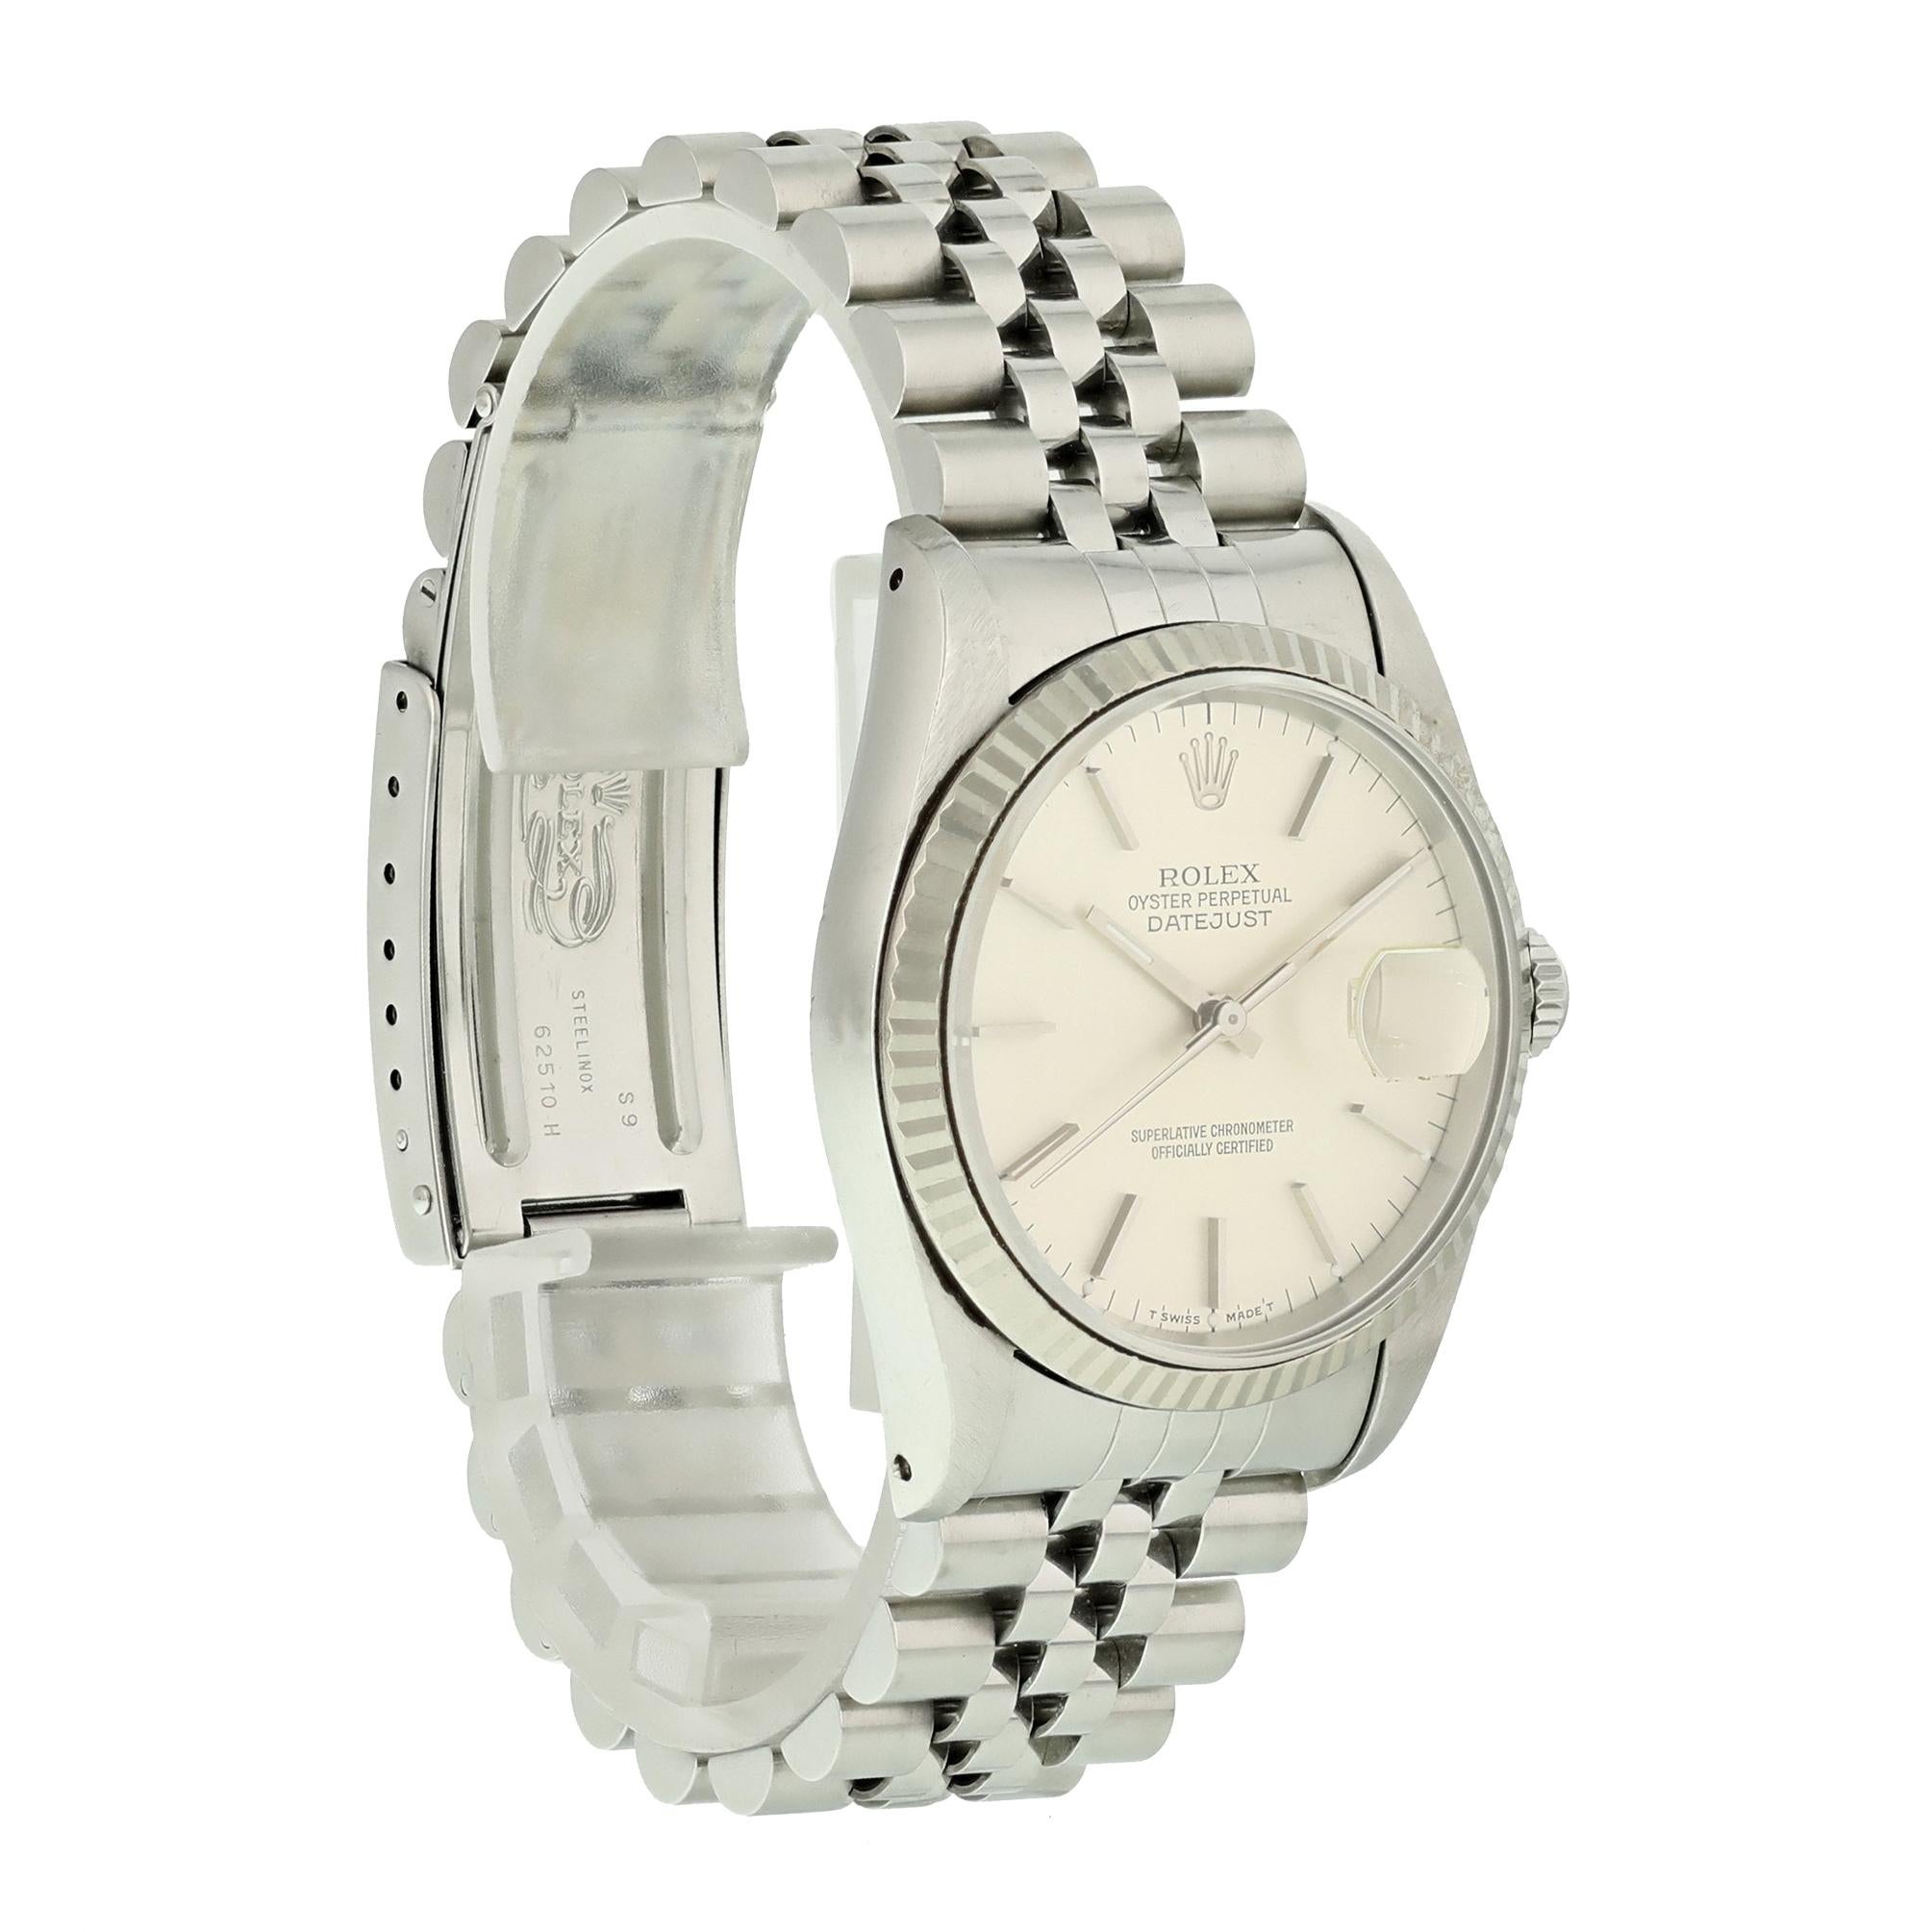 Men's Rolex Oyster Perpetual Datejust 16234 Men’s Watch For Sale